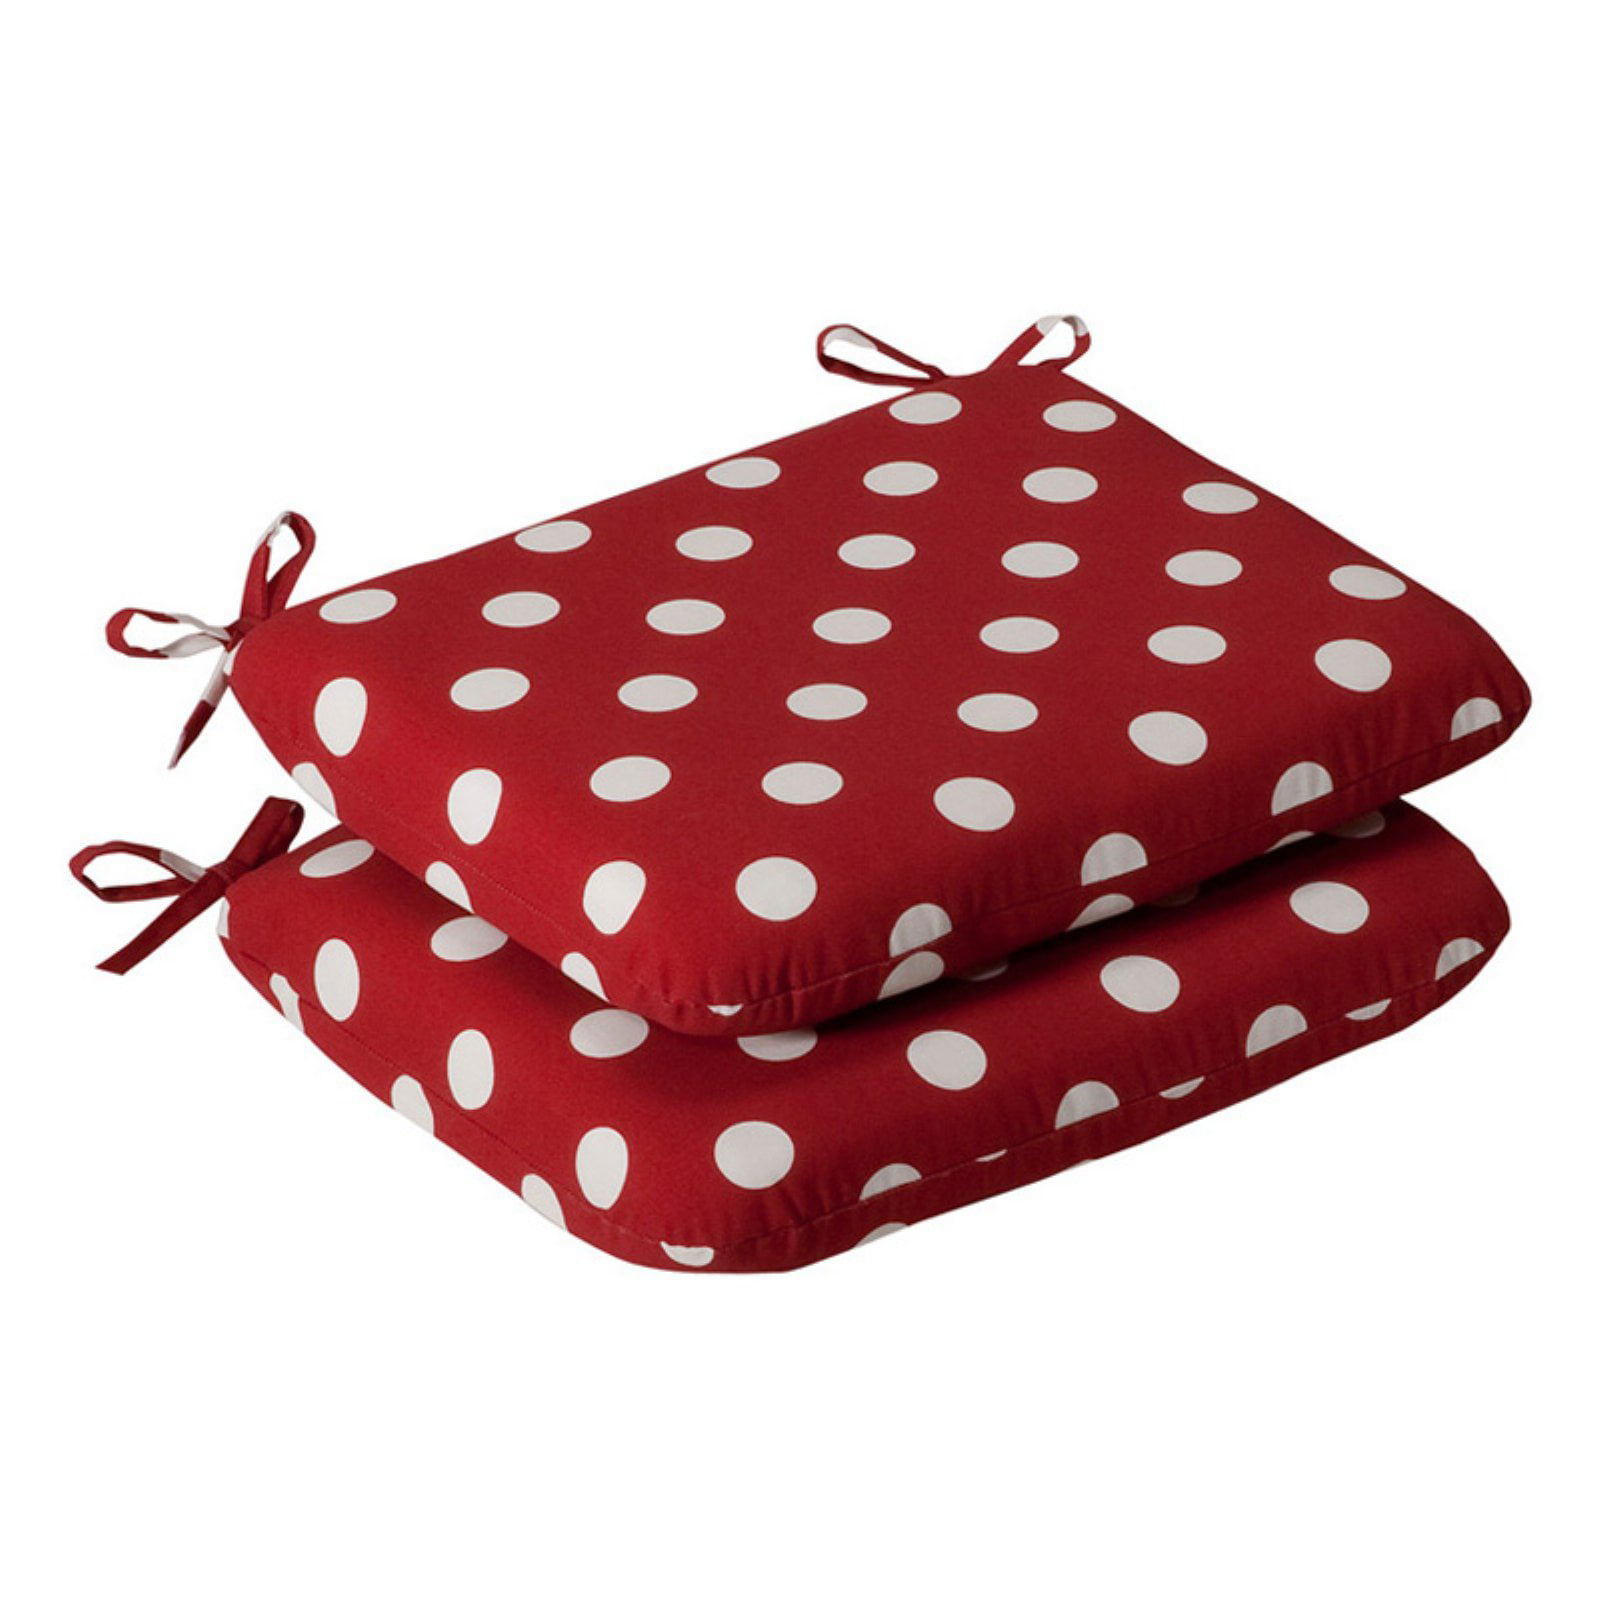 Pillow Perfect Red/White Polka Dot Outdoor Seat Cushion